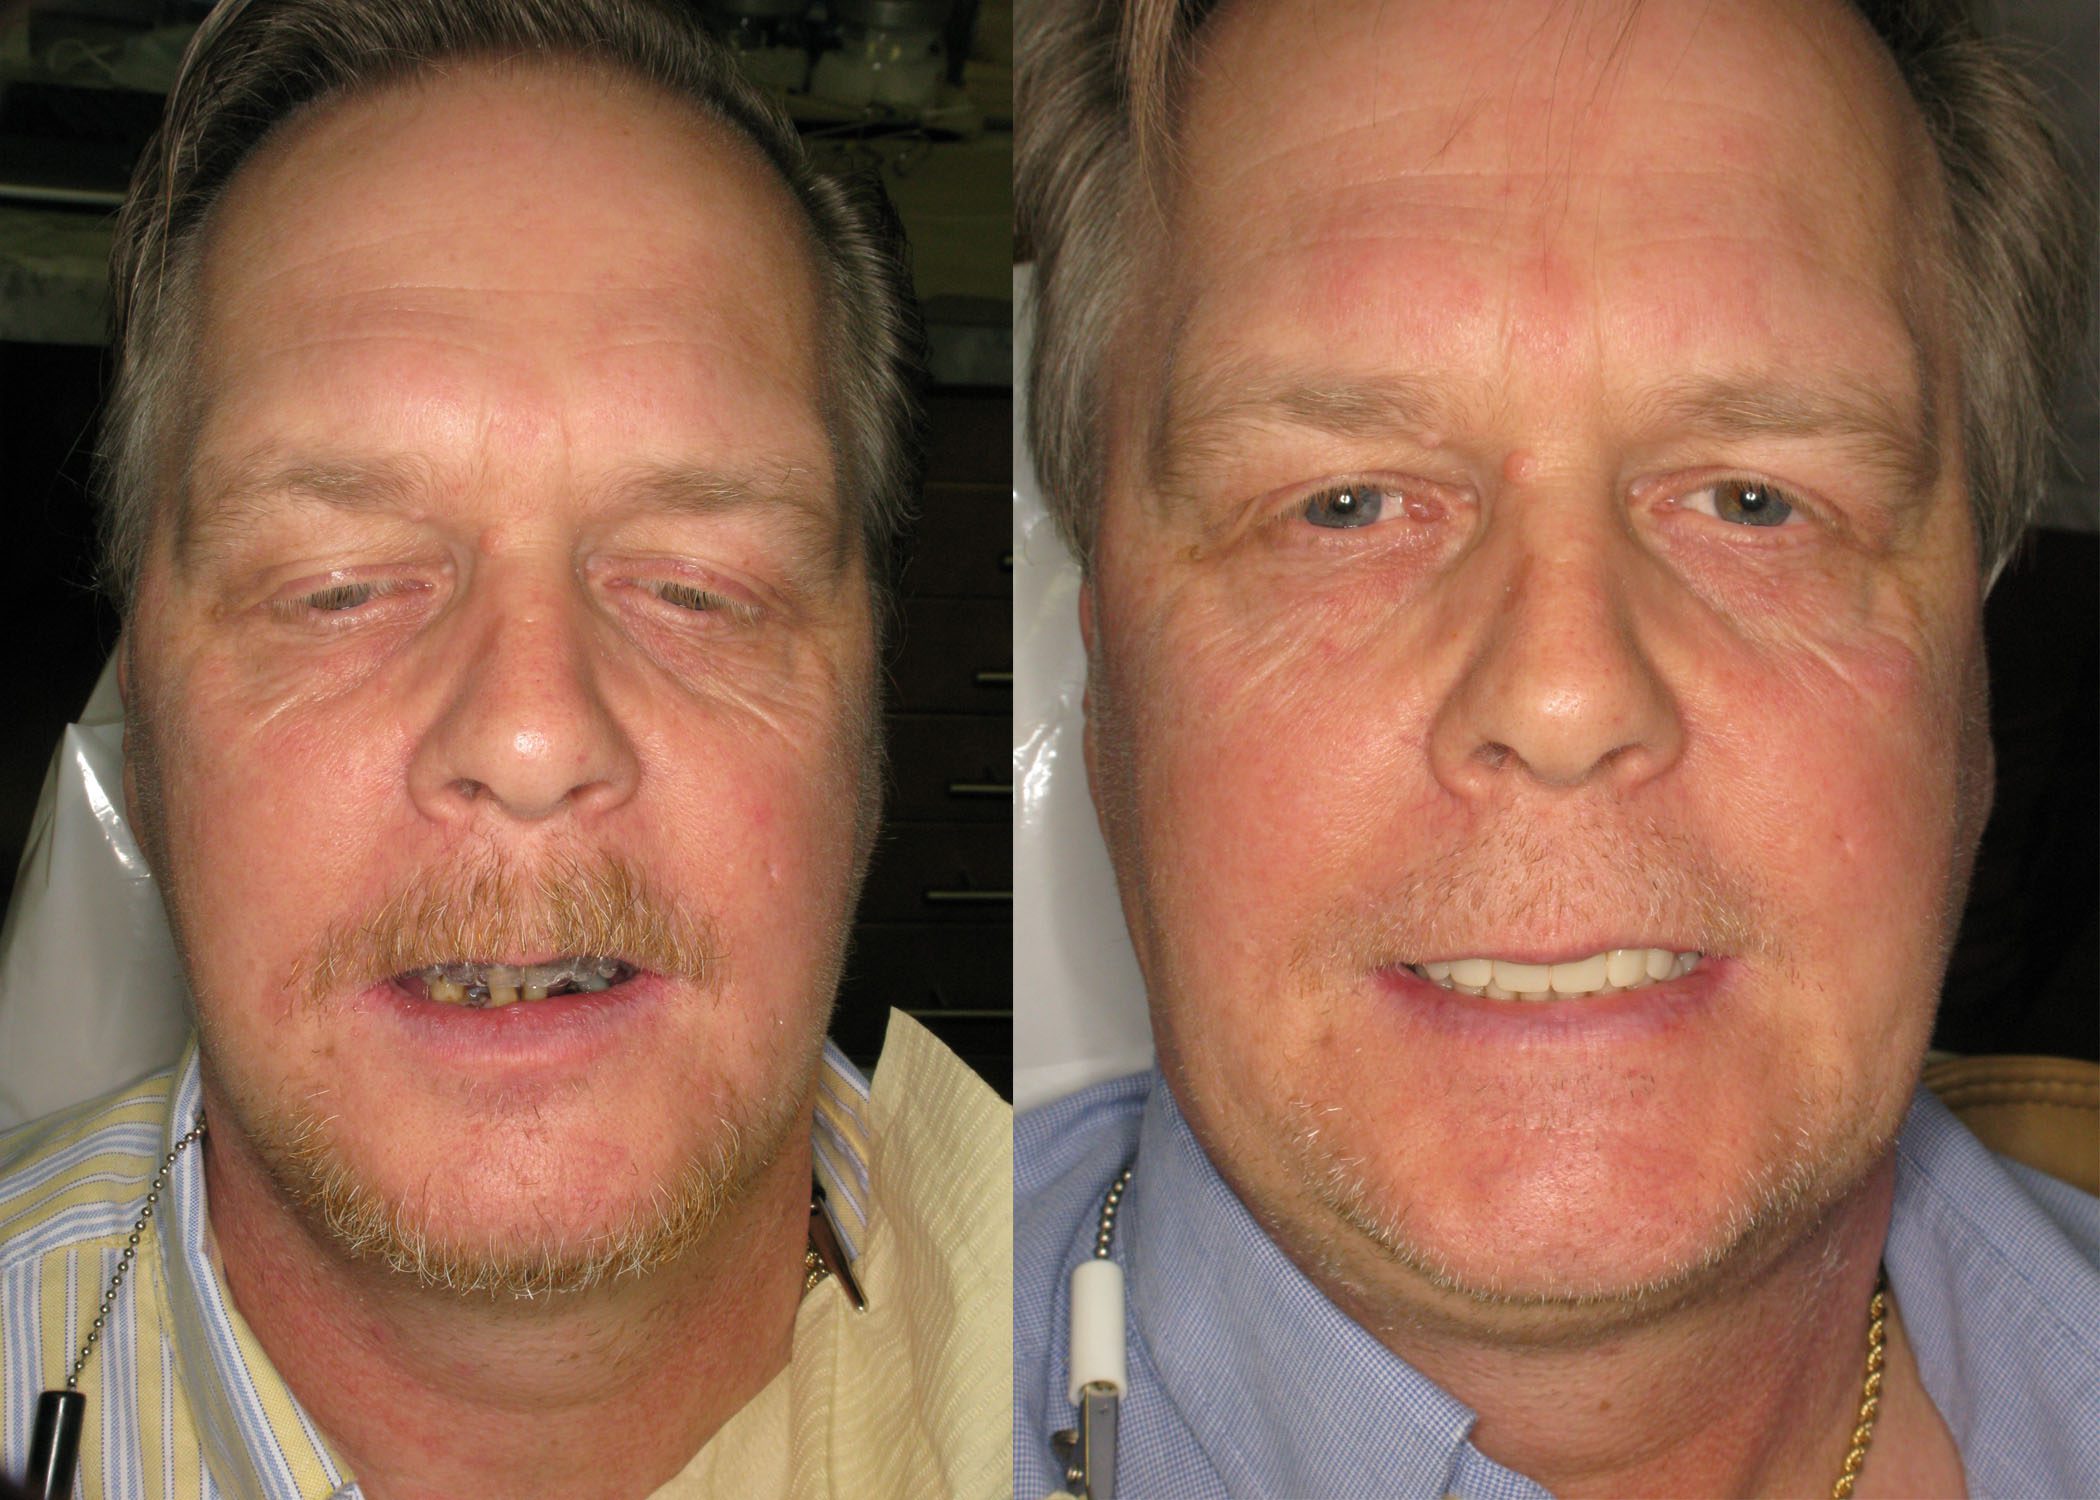 Upper Denture and Lower Partial to All On 4